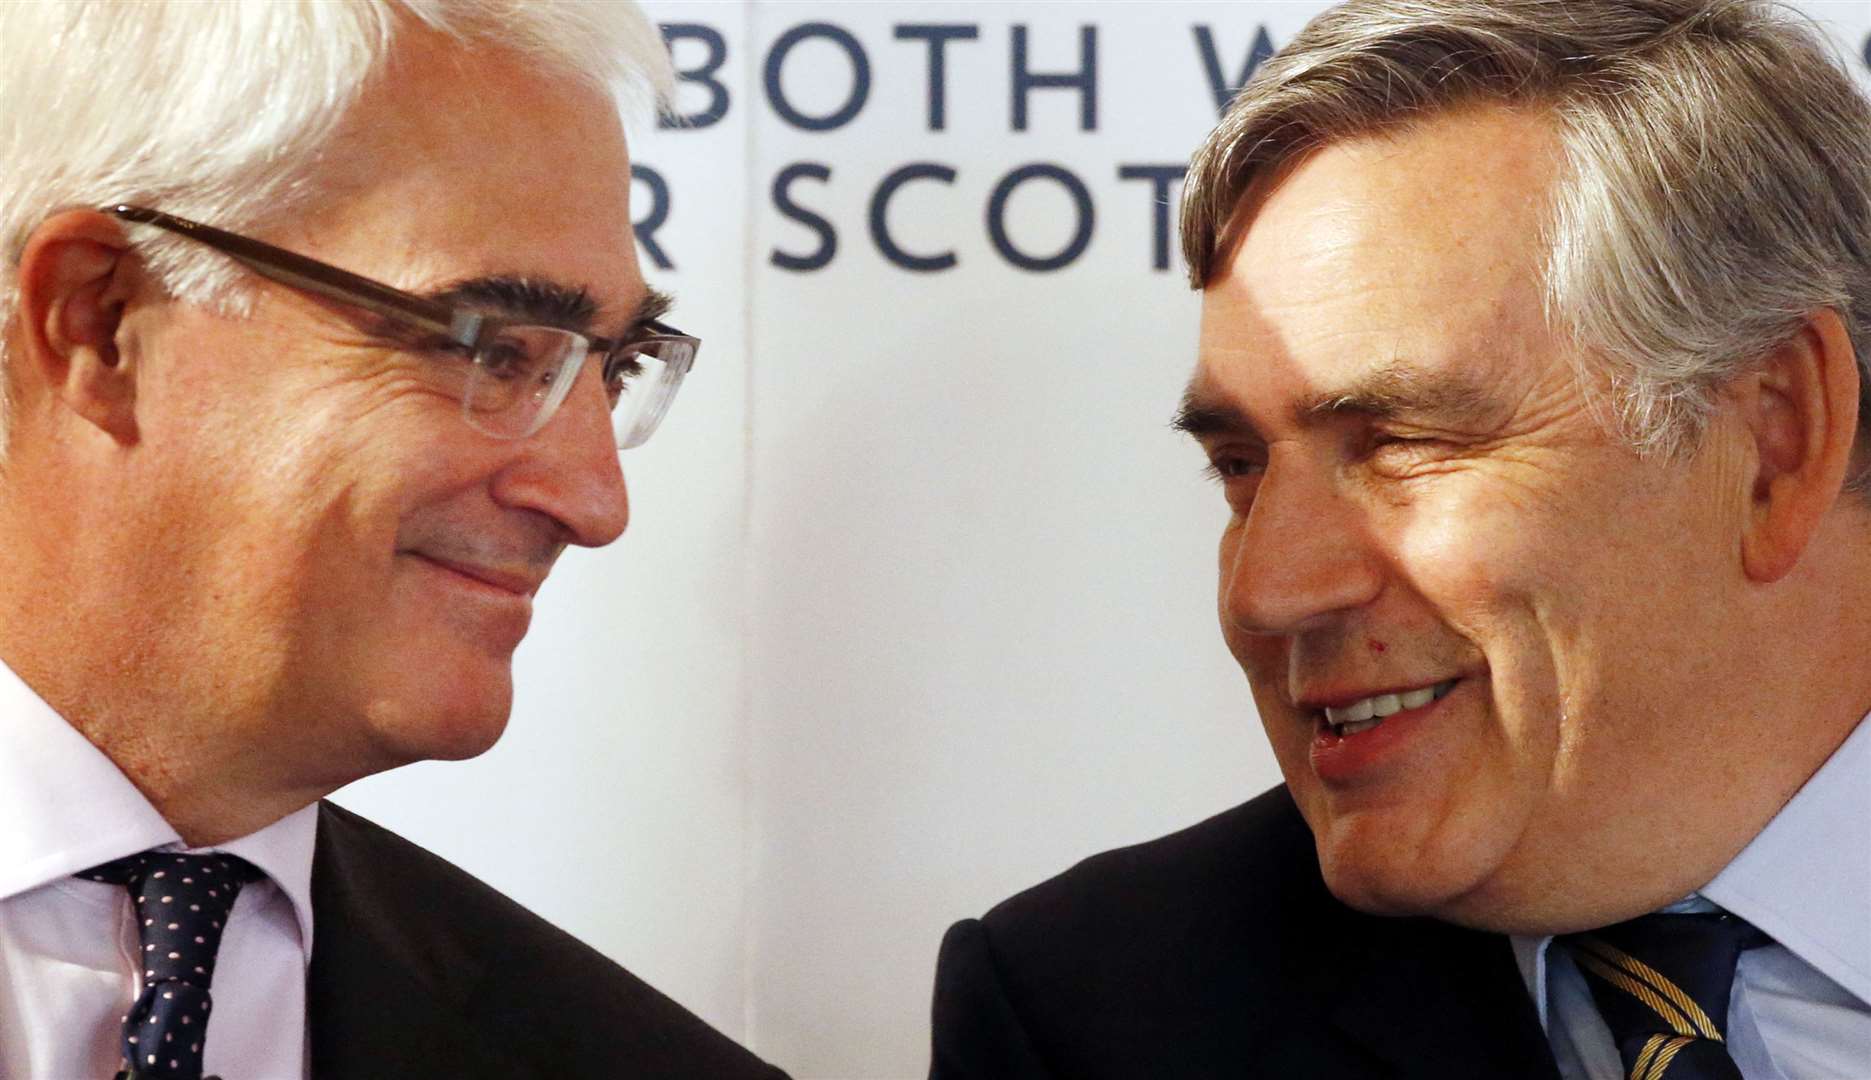 Alistair Darling and Gordon Brown worked closely together during the 2014 independence referendum (PA)